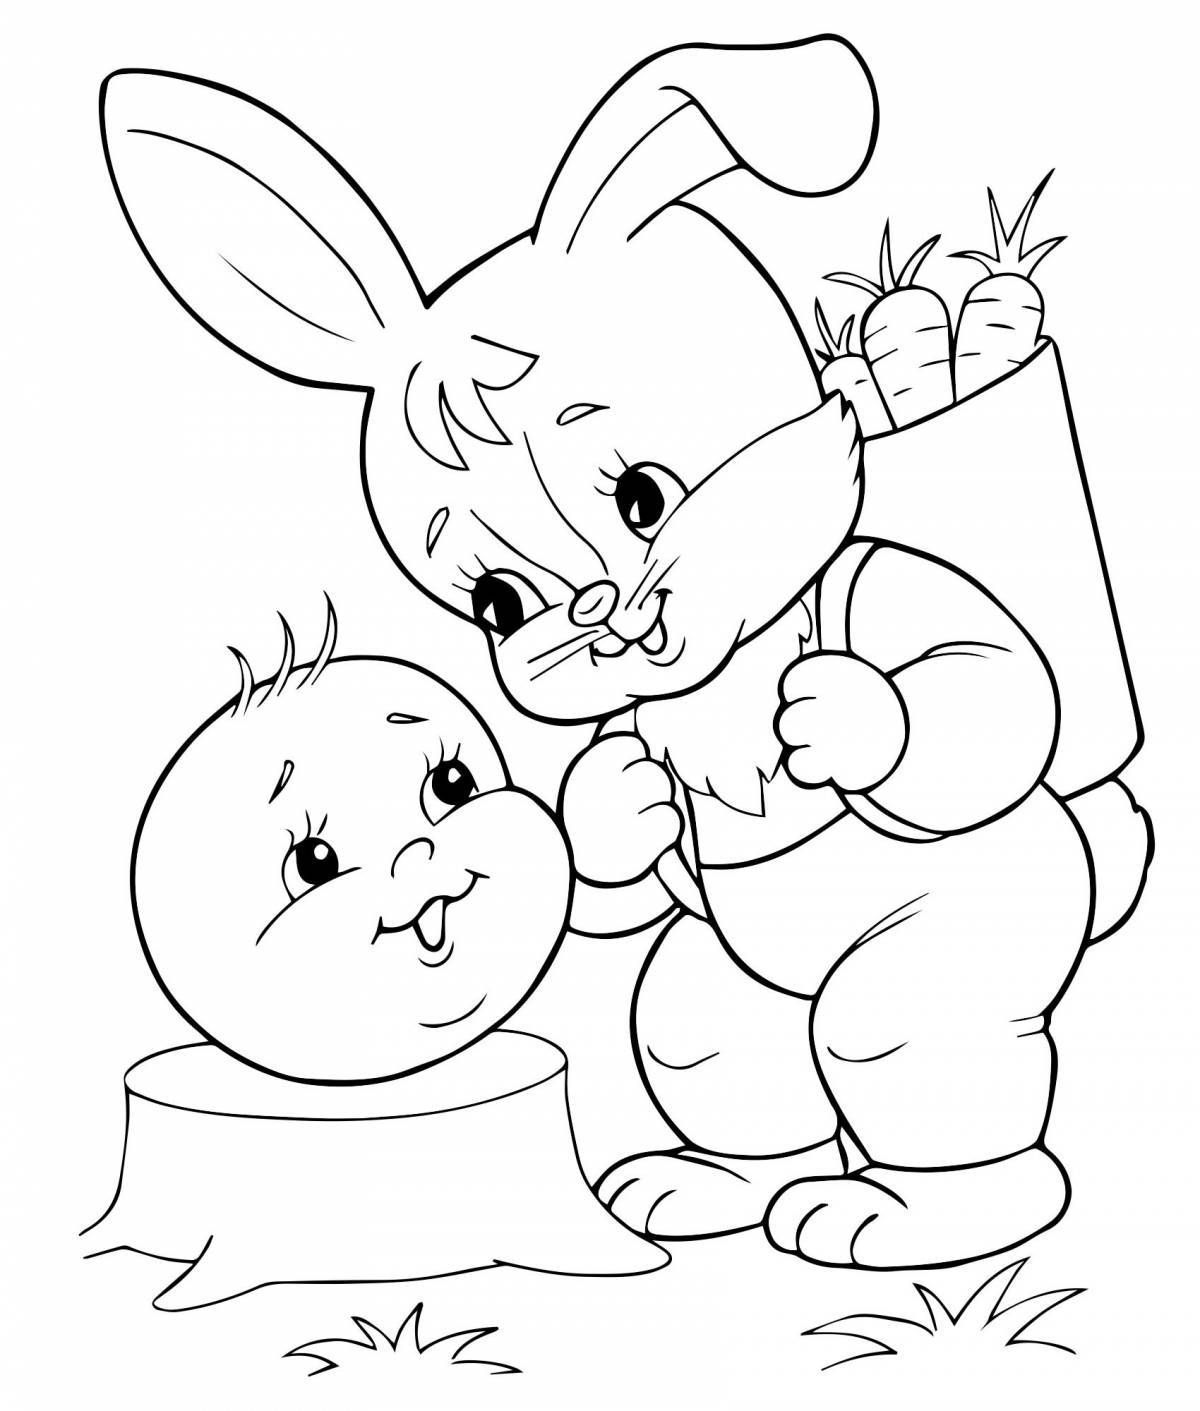 Adorable coloring picture for kids